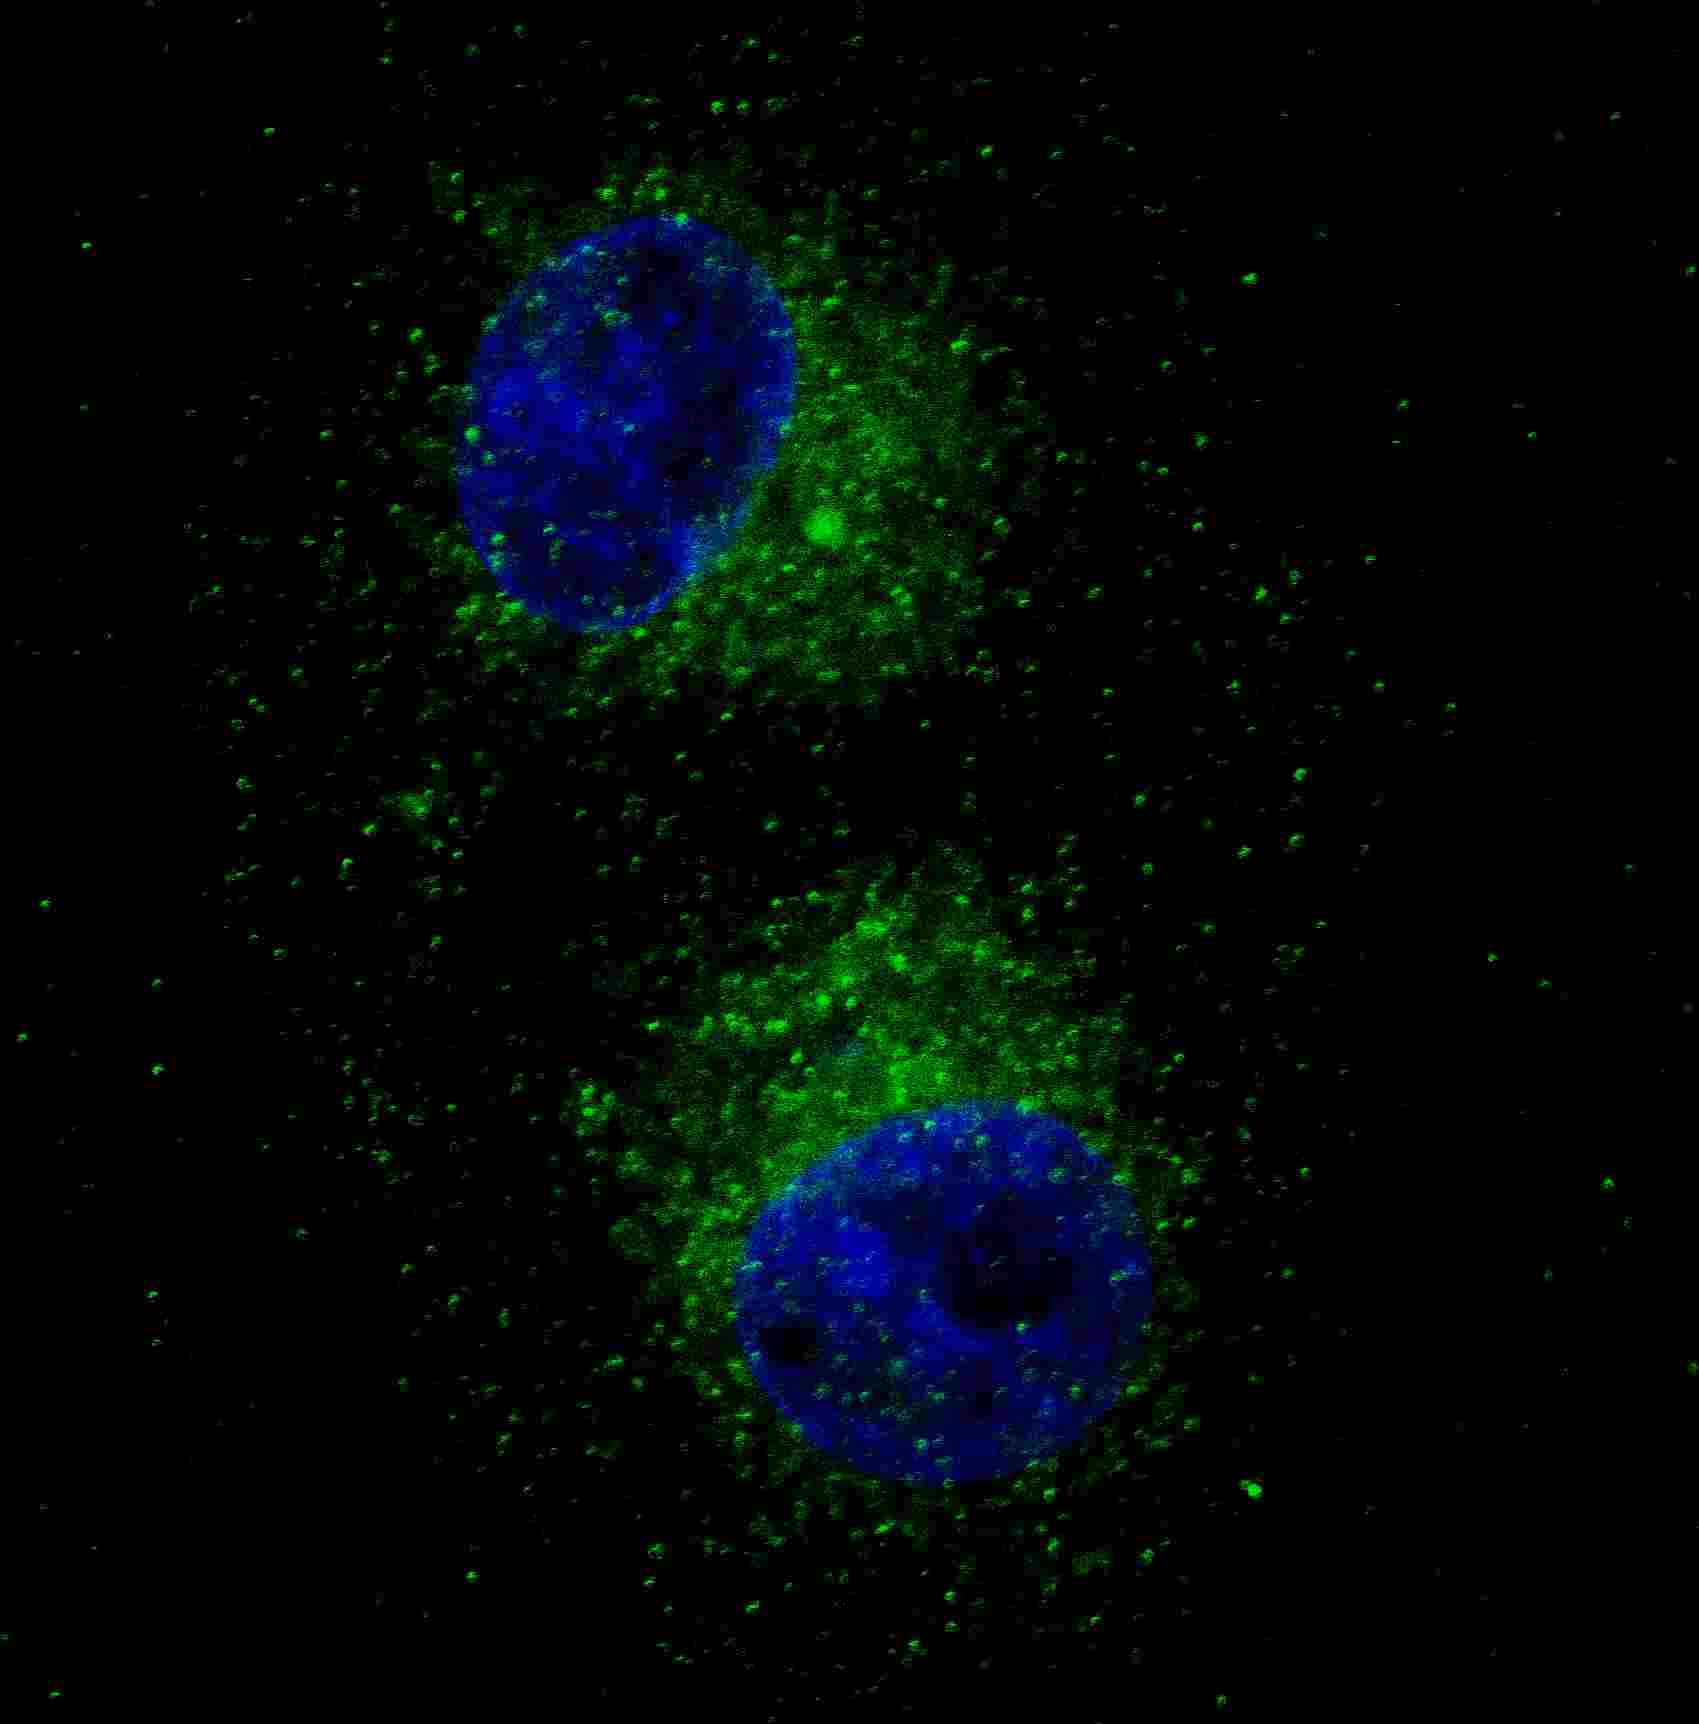 Fluorescent confocal image of HepG2 cells stained with MET/HGFR antibody. HepG2 cells were fixed with 4% PFA (20 min), permeabilized with Triton X-100 (0.2%, 30 min). Cells were then incubated with AM1002a MET/HGFR primary antibody (1:100, 2 h at room temperature). For secondary antibody, Alexa Fluor® 488 conjugated donkey anti-mouse antibody (green) was used (1:1000, 1h). Nuclei were counterstained with Hoechst 33342 (blue) (10 μg/ml, 5 min). ). Note the highly specific localization of the MET immunosignal to the cytoplasm, supported by Human Protein Atlas Data (http://www.proteinatlas.org/ENSG00000105976).